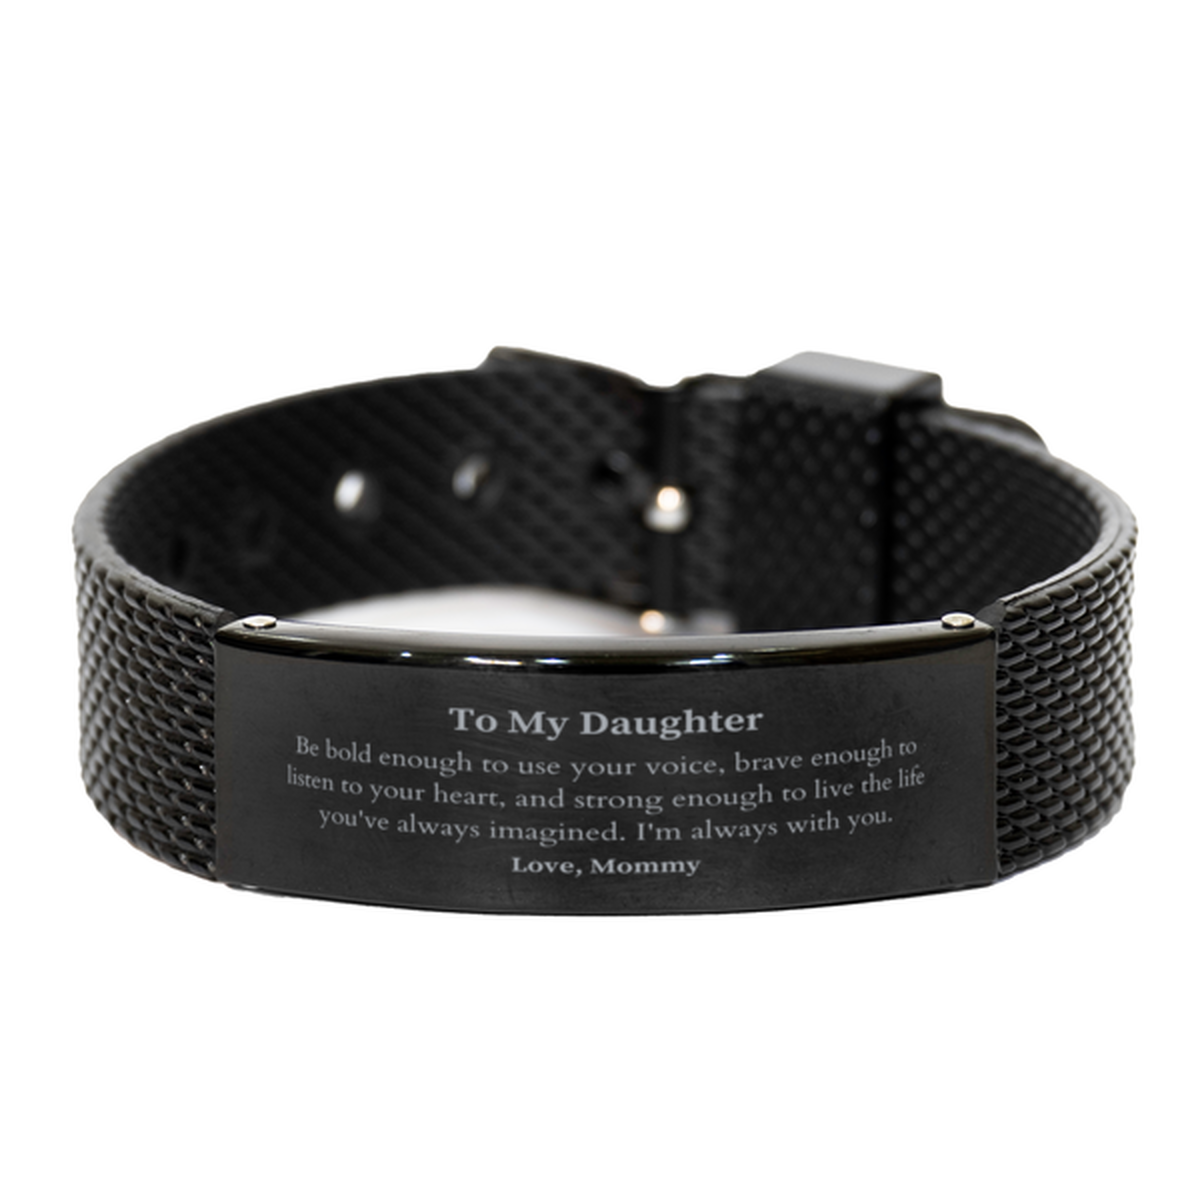 Keepsake Daughter Black Shark Mesh Bracelet Gift Idea Graduation Christmas Birthday Daughter from Mommy, Daughter Be bold enough to use your voice, brave enough to listen to your heart. Love, Mommy